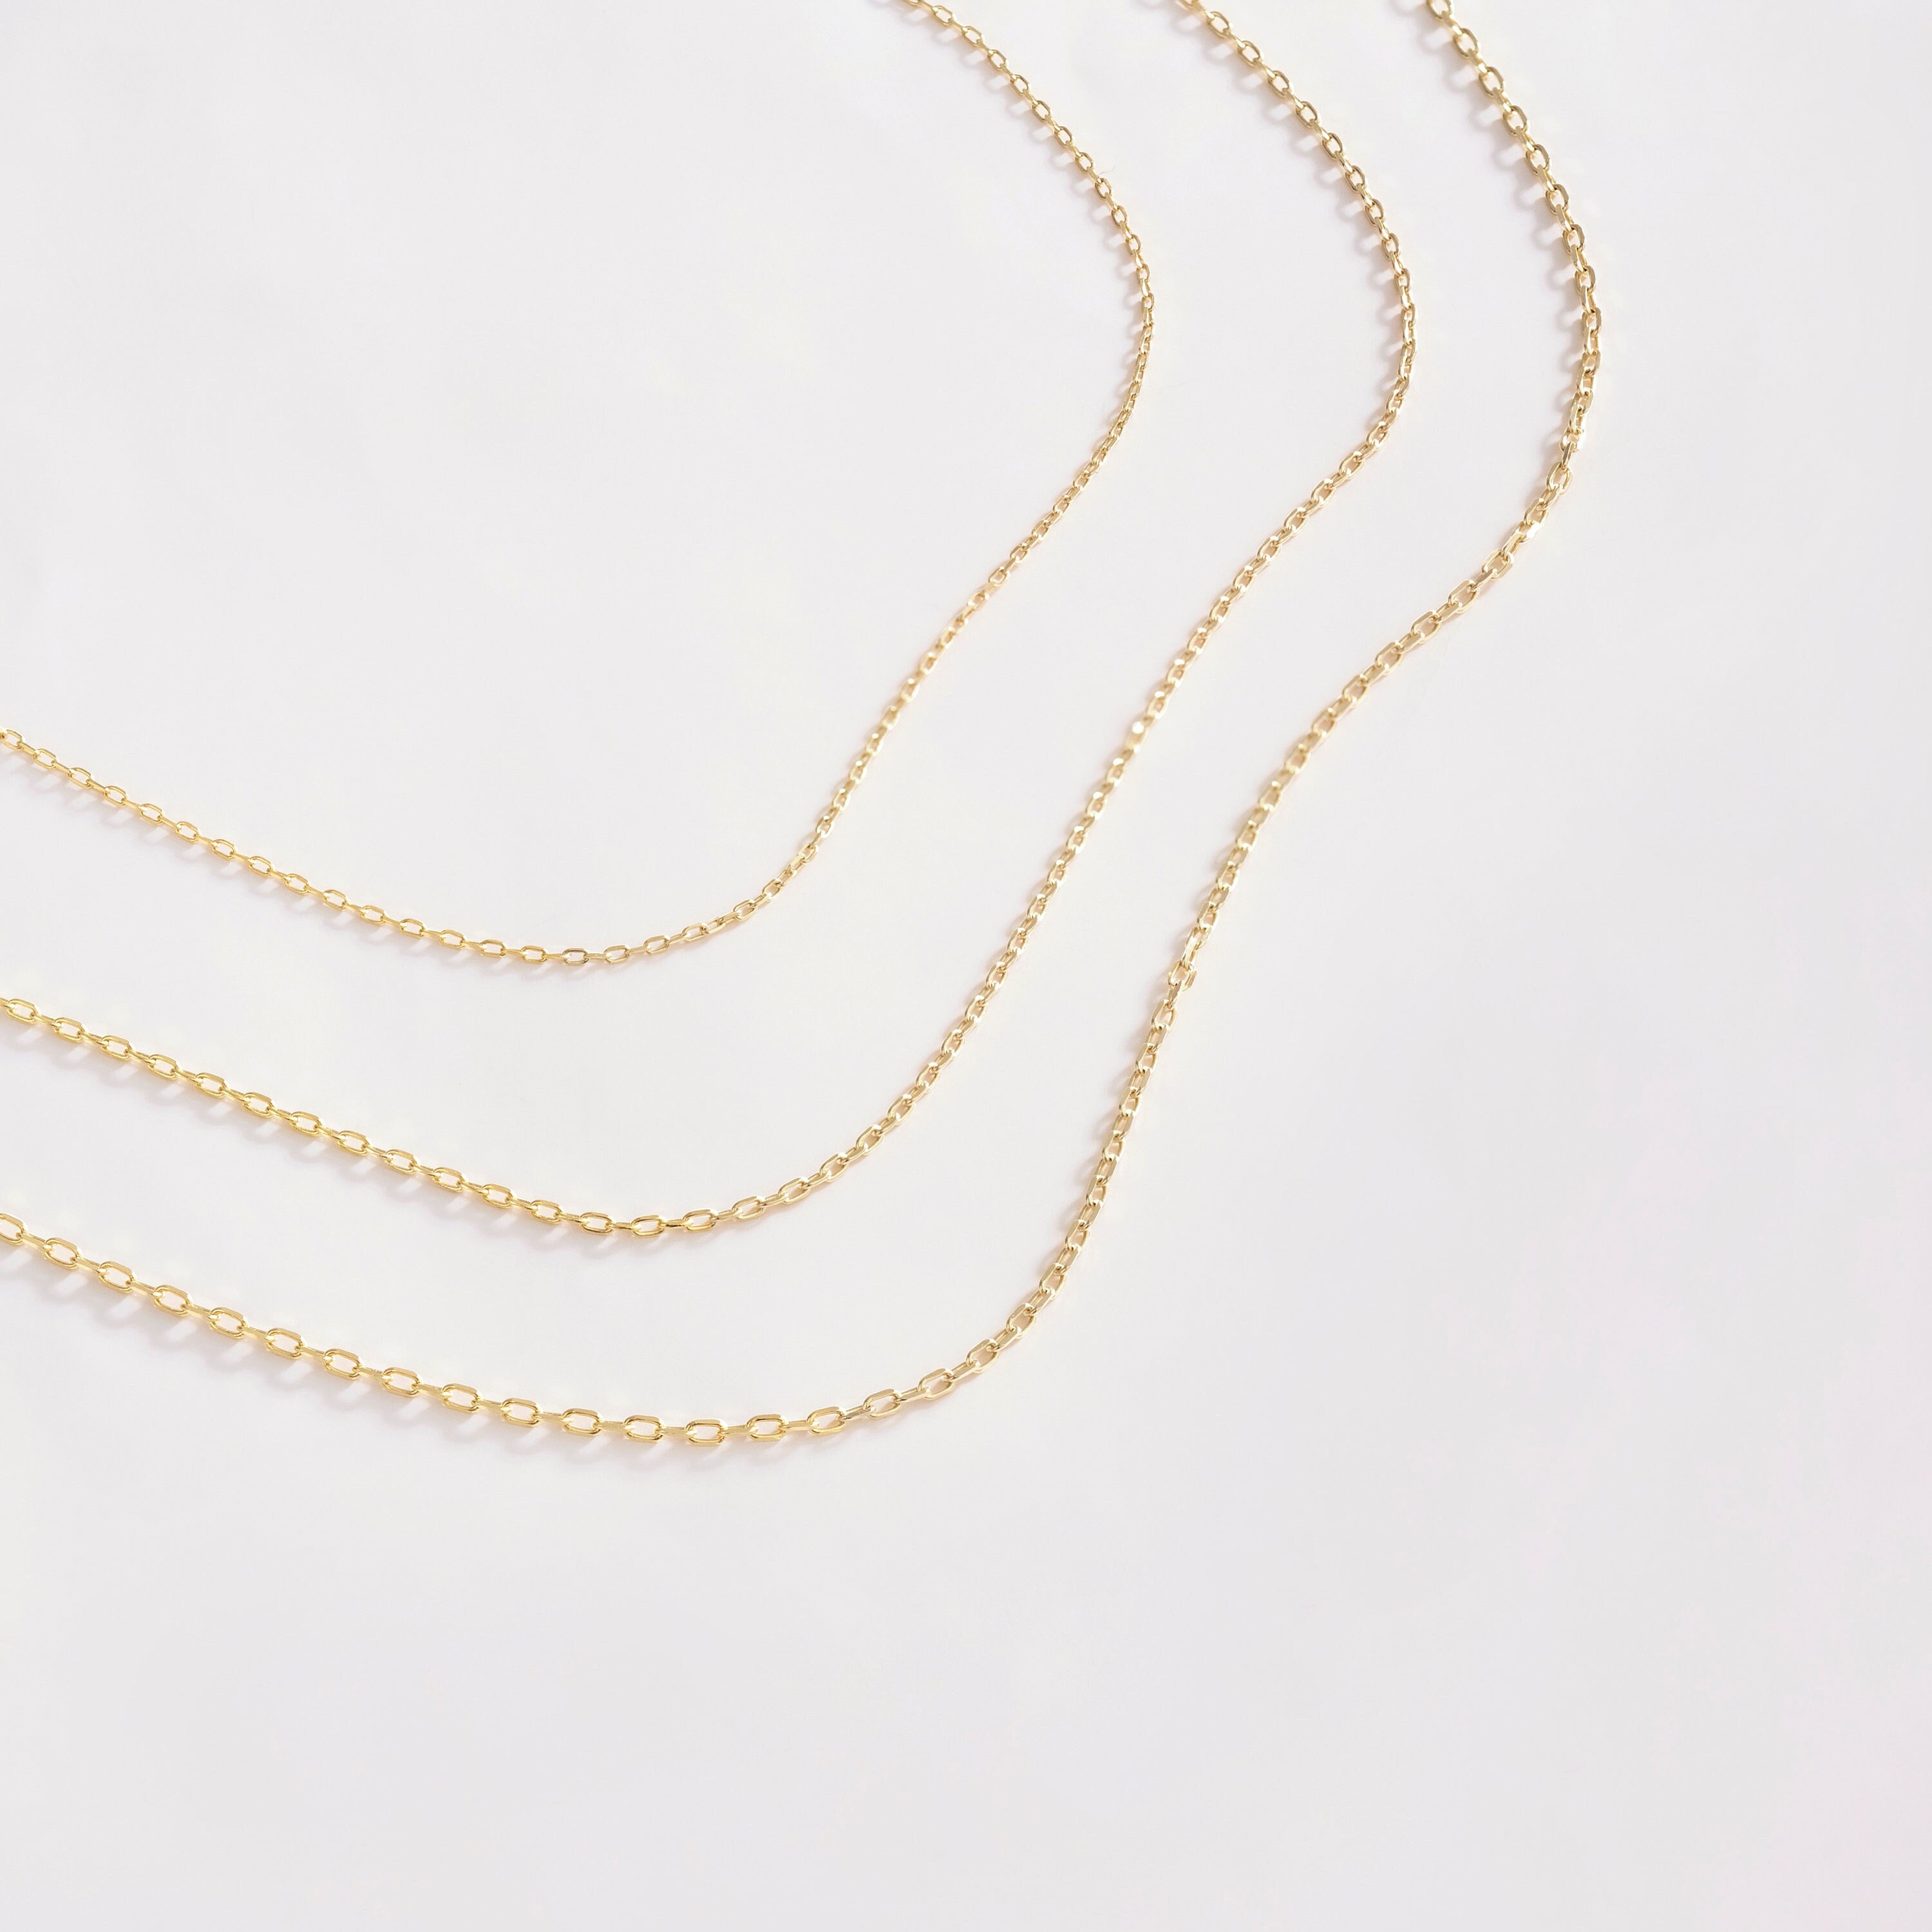 14K Solid Gold Simple Cable Chain Necklace - 14 Karat Basic Thick Cable Chain - Gold Layering Chain Necklace for Women - Thick Long Chain